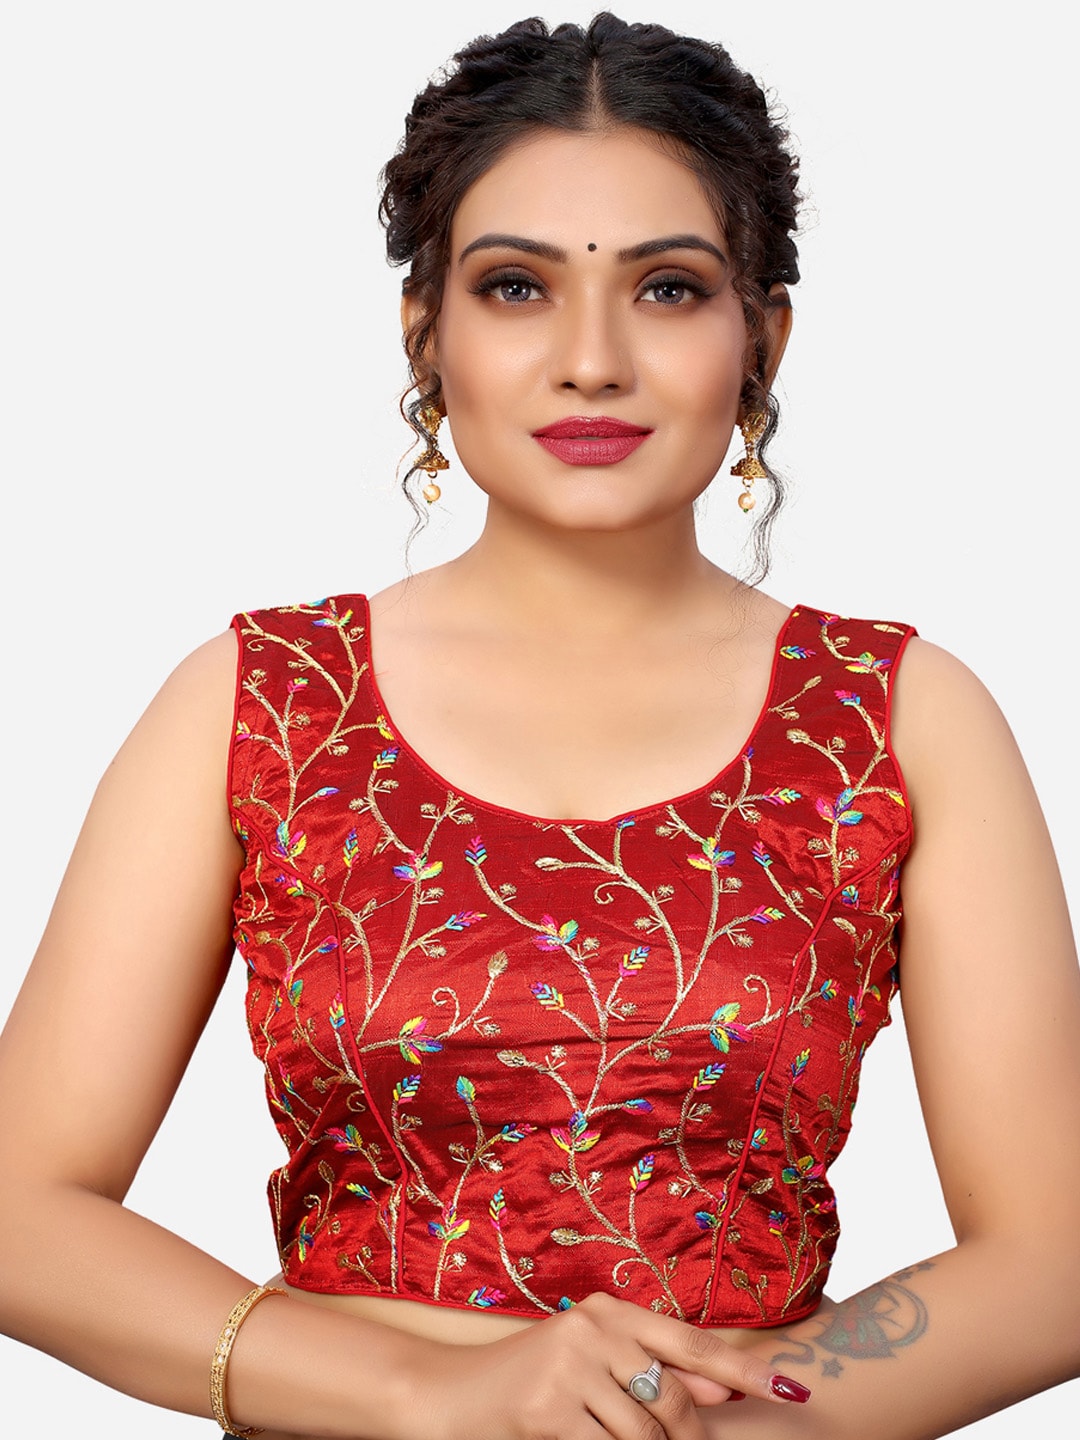 SIRIL Maroon Embroidered Readymade Saree Blouse Price in India